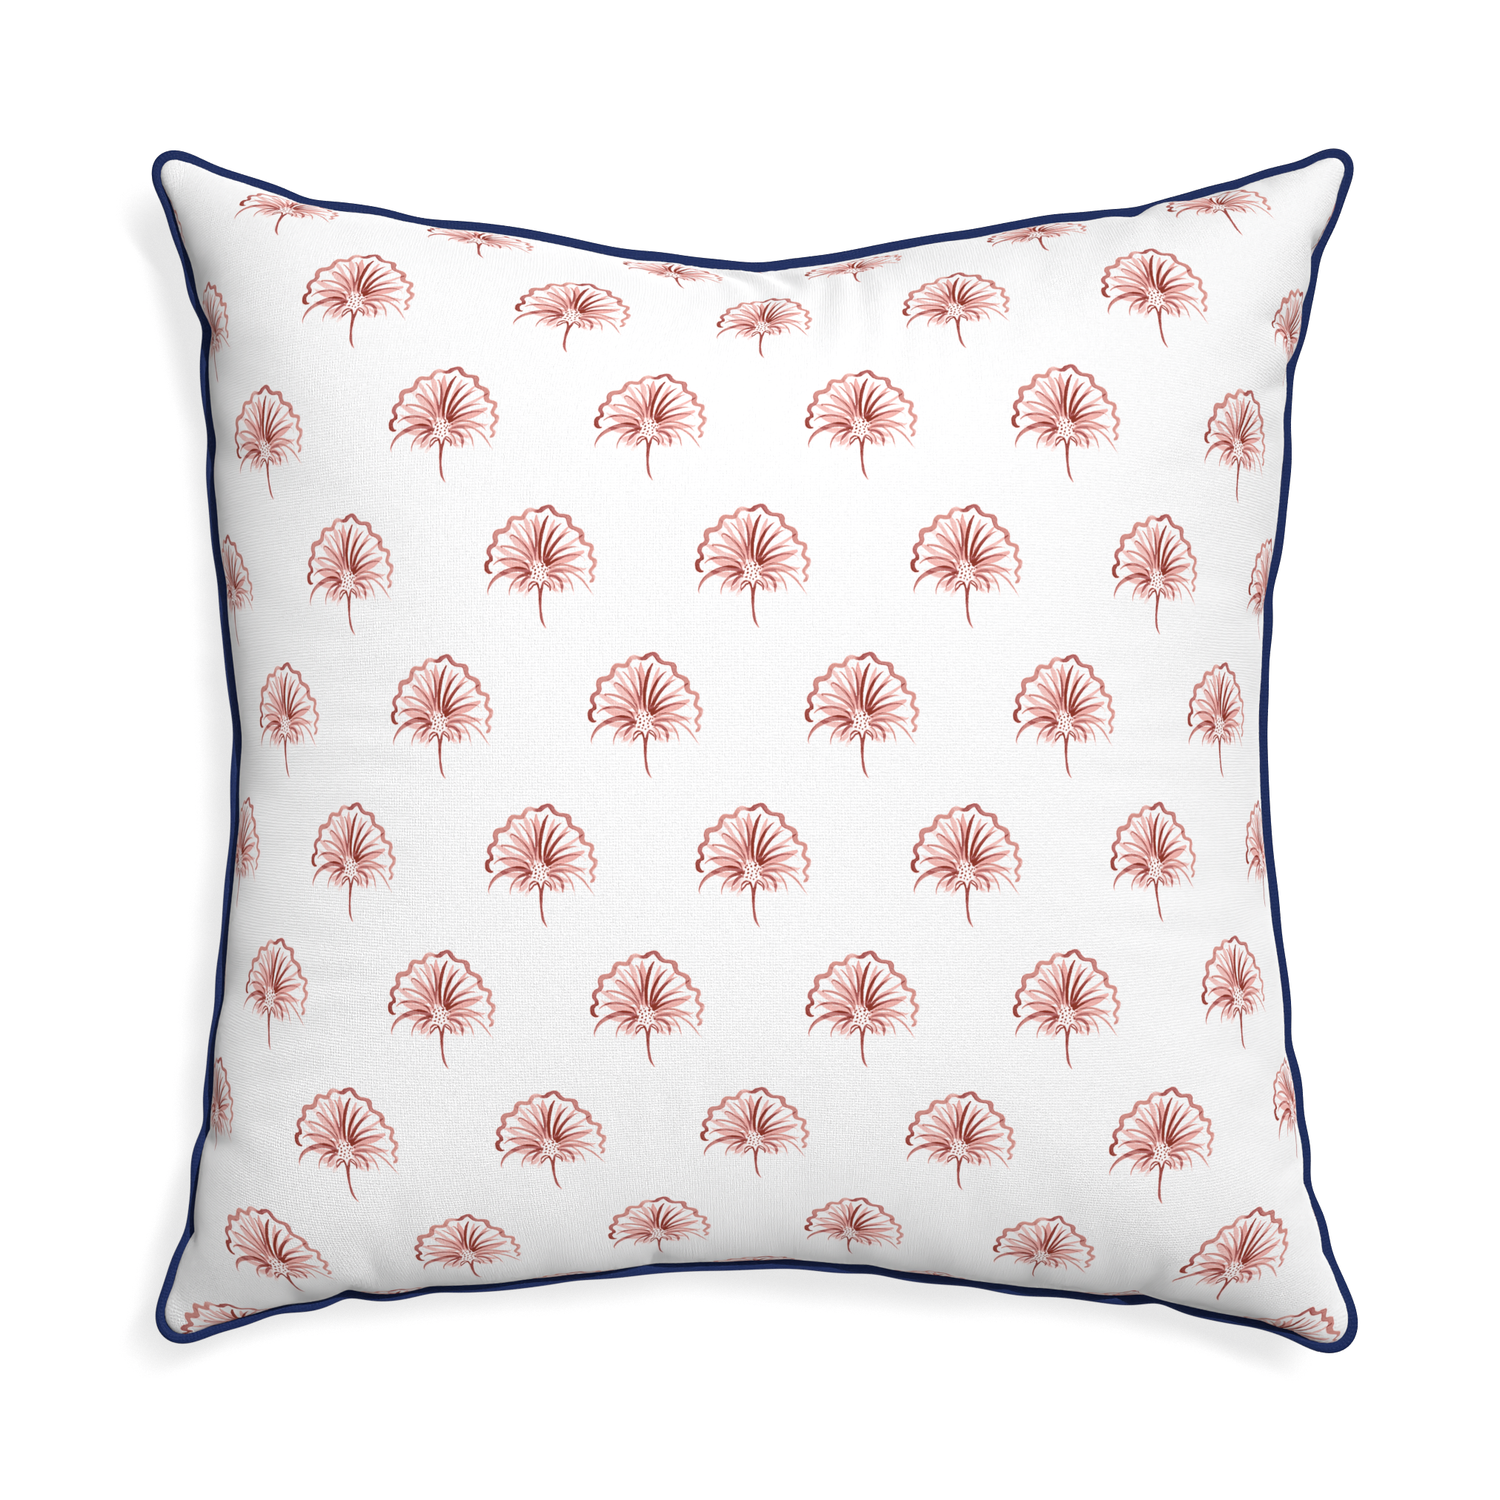 Euro-sham penelope rose custom floral pinkpillow with midnight piping on white background